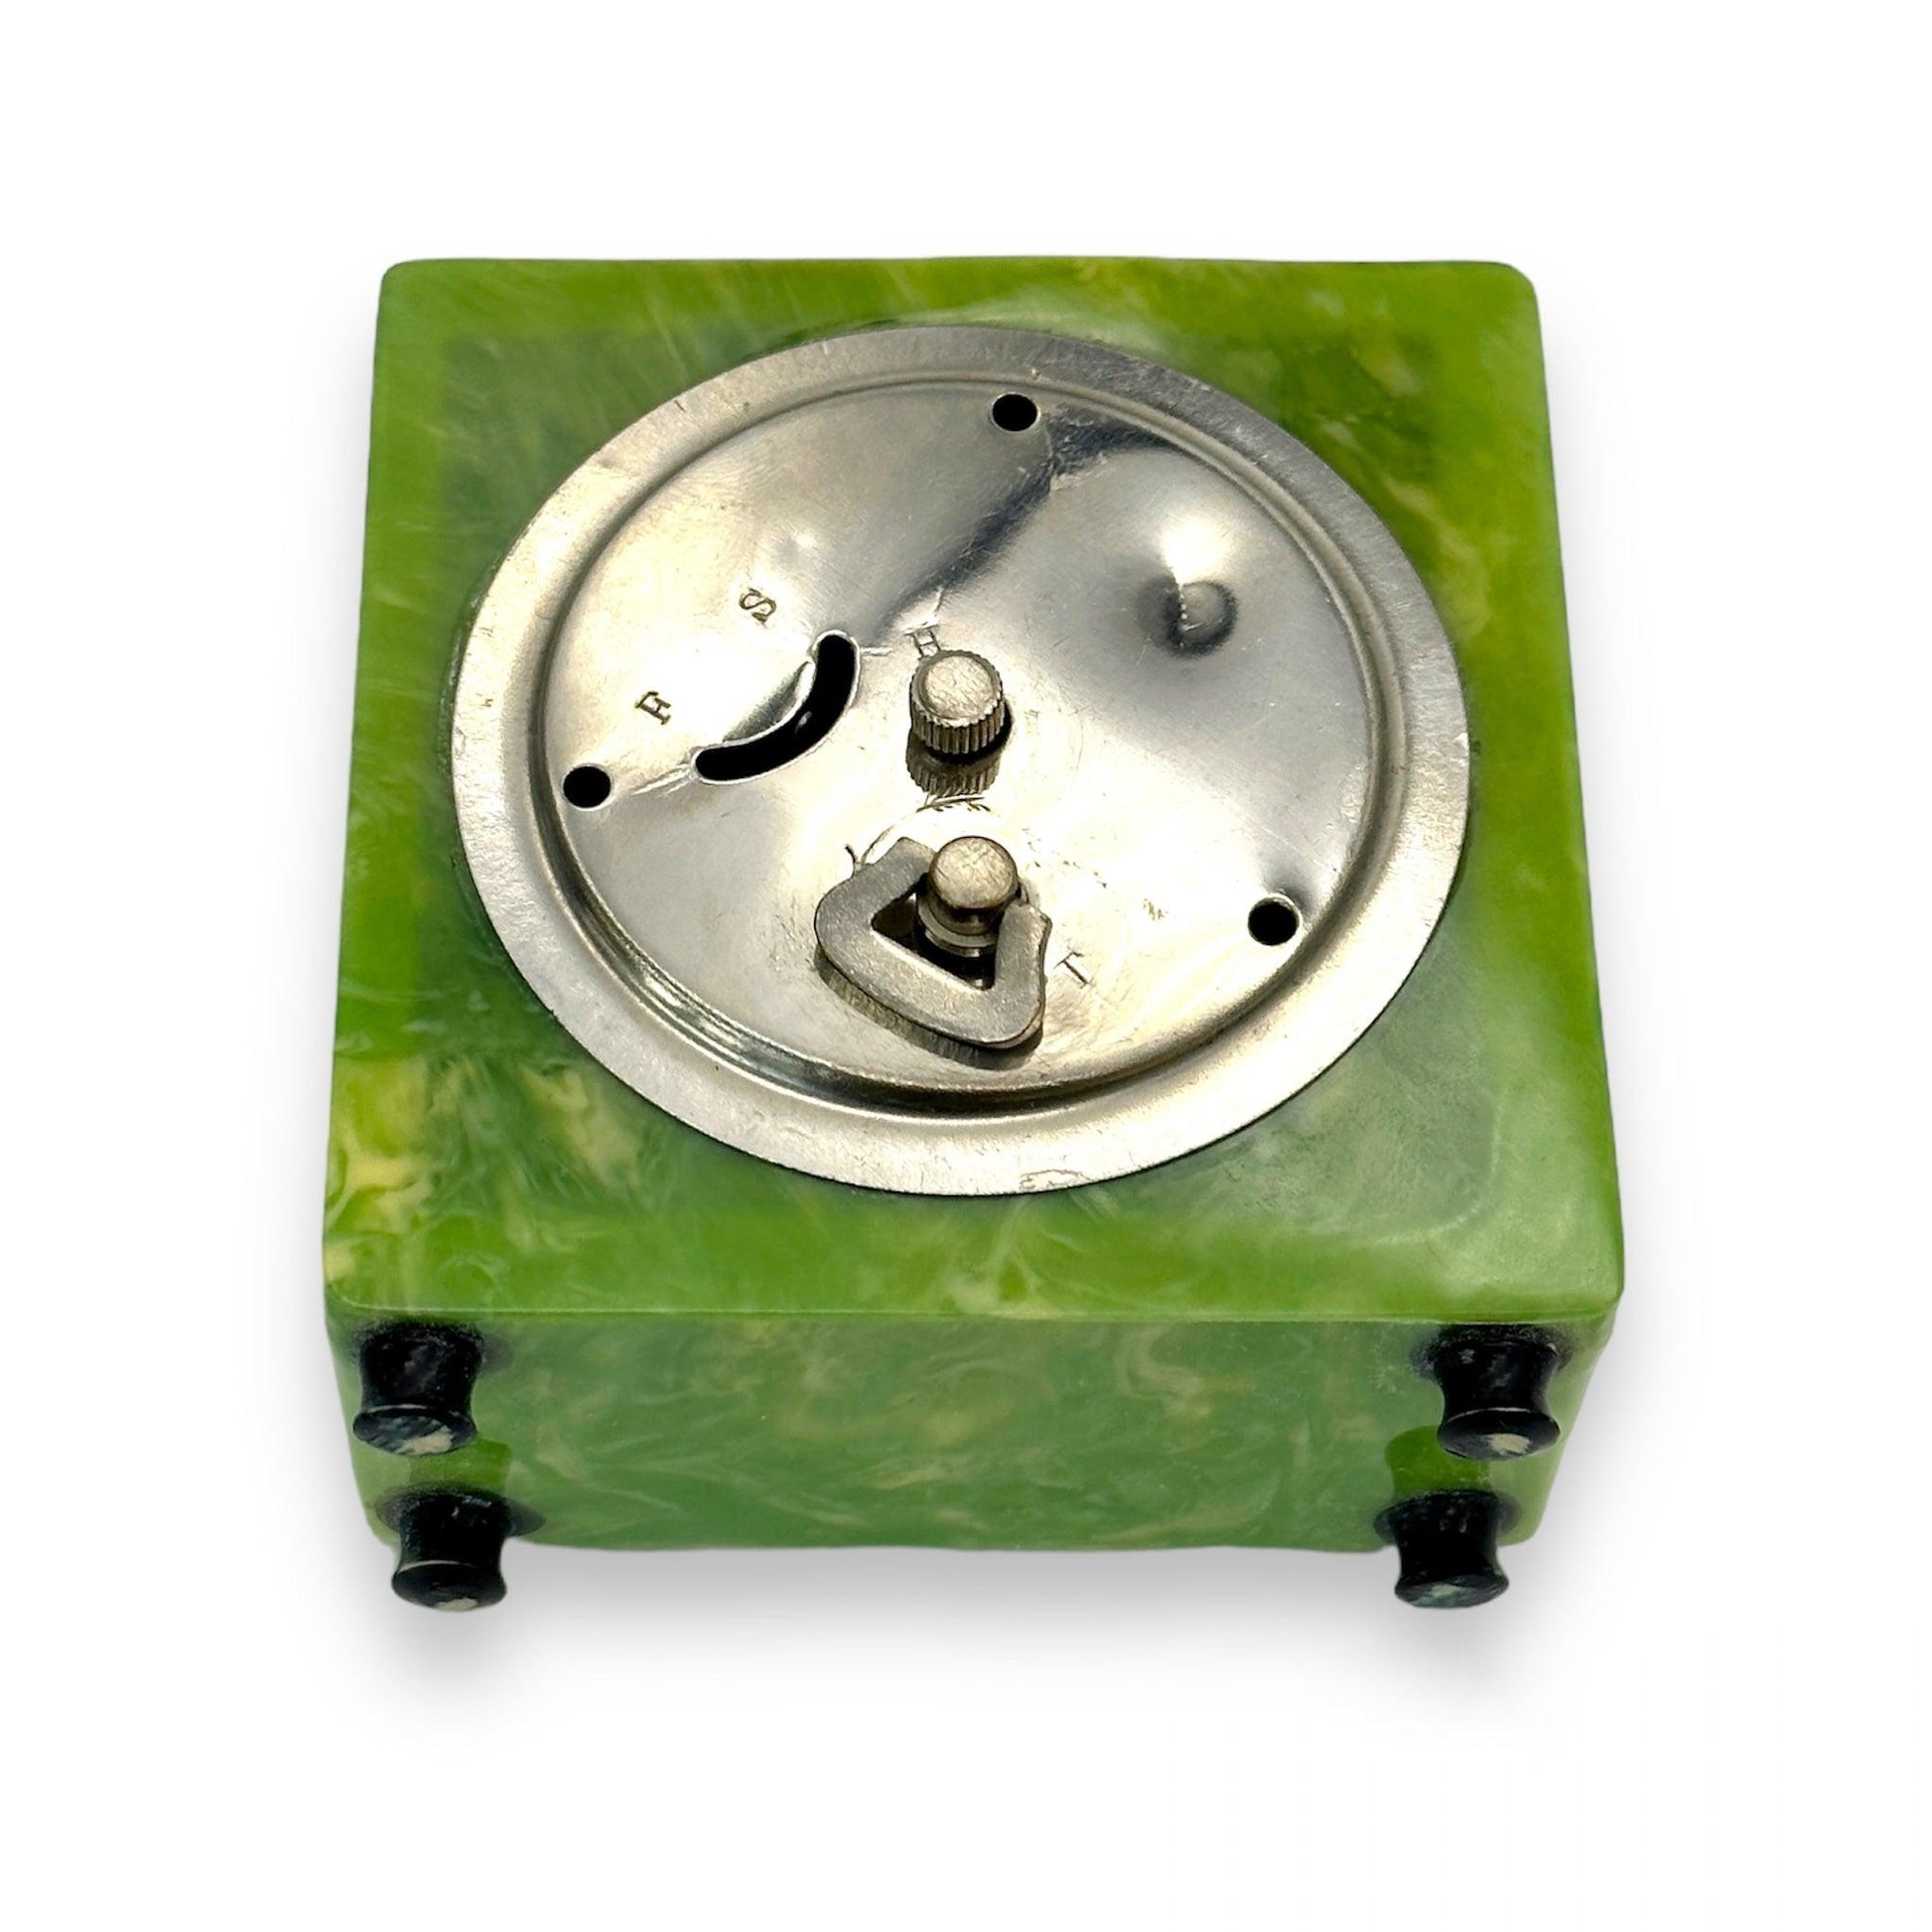 Bring this Vintage Green Clock Home for Nostalgic Beauty and Style!